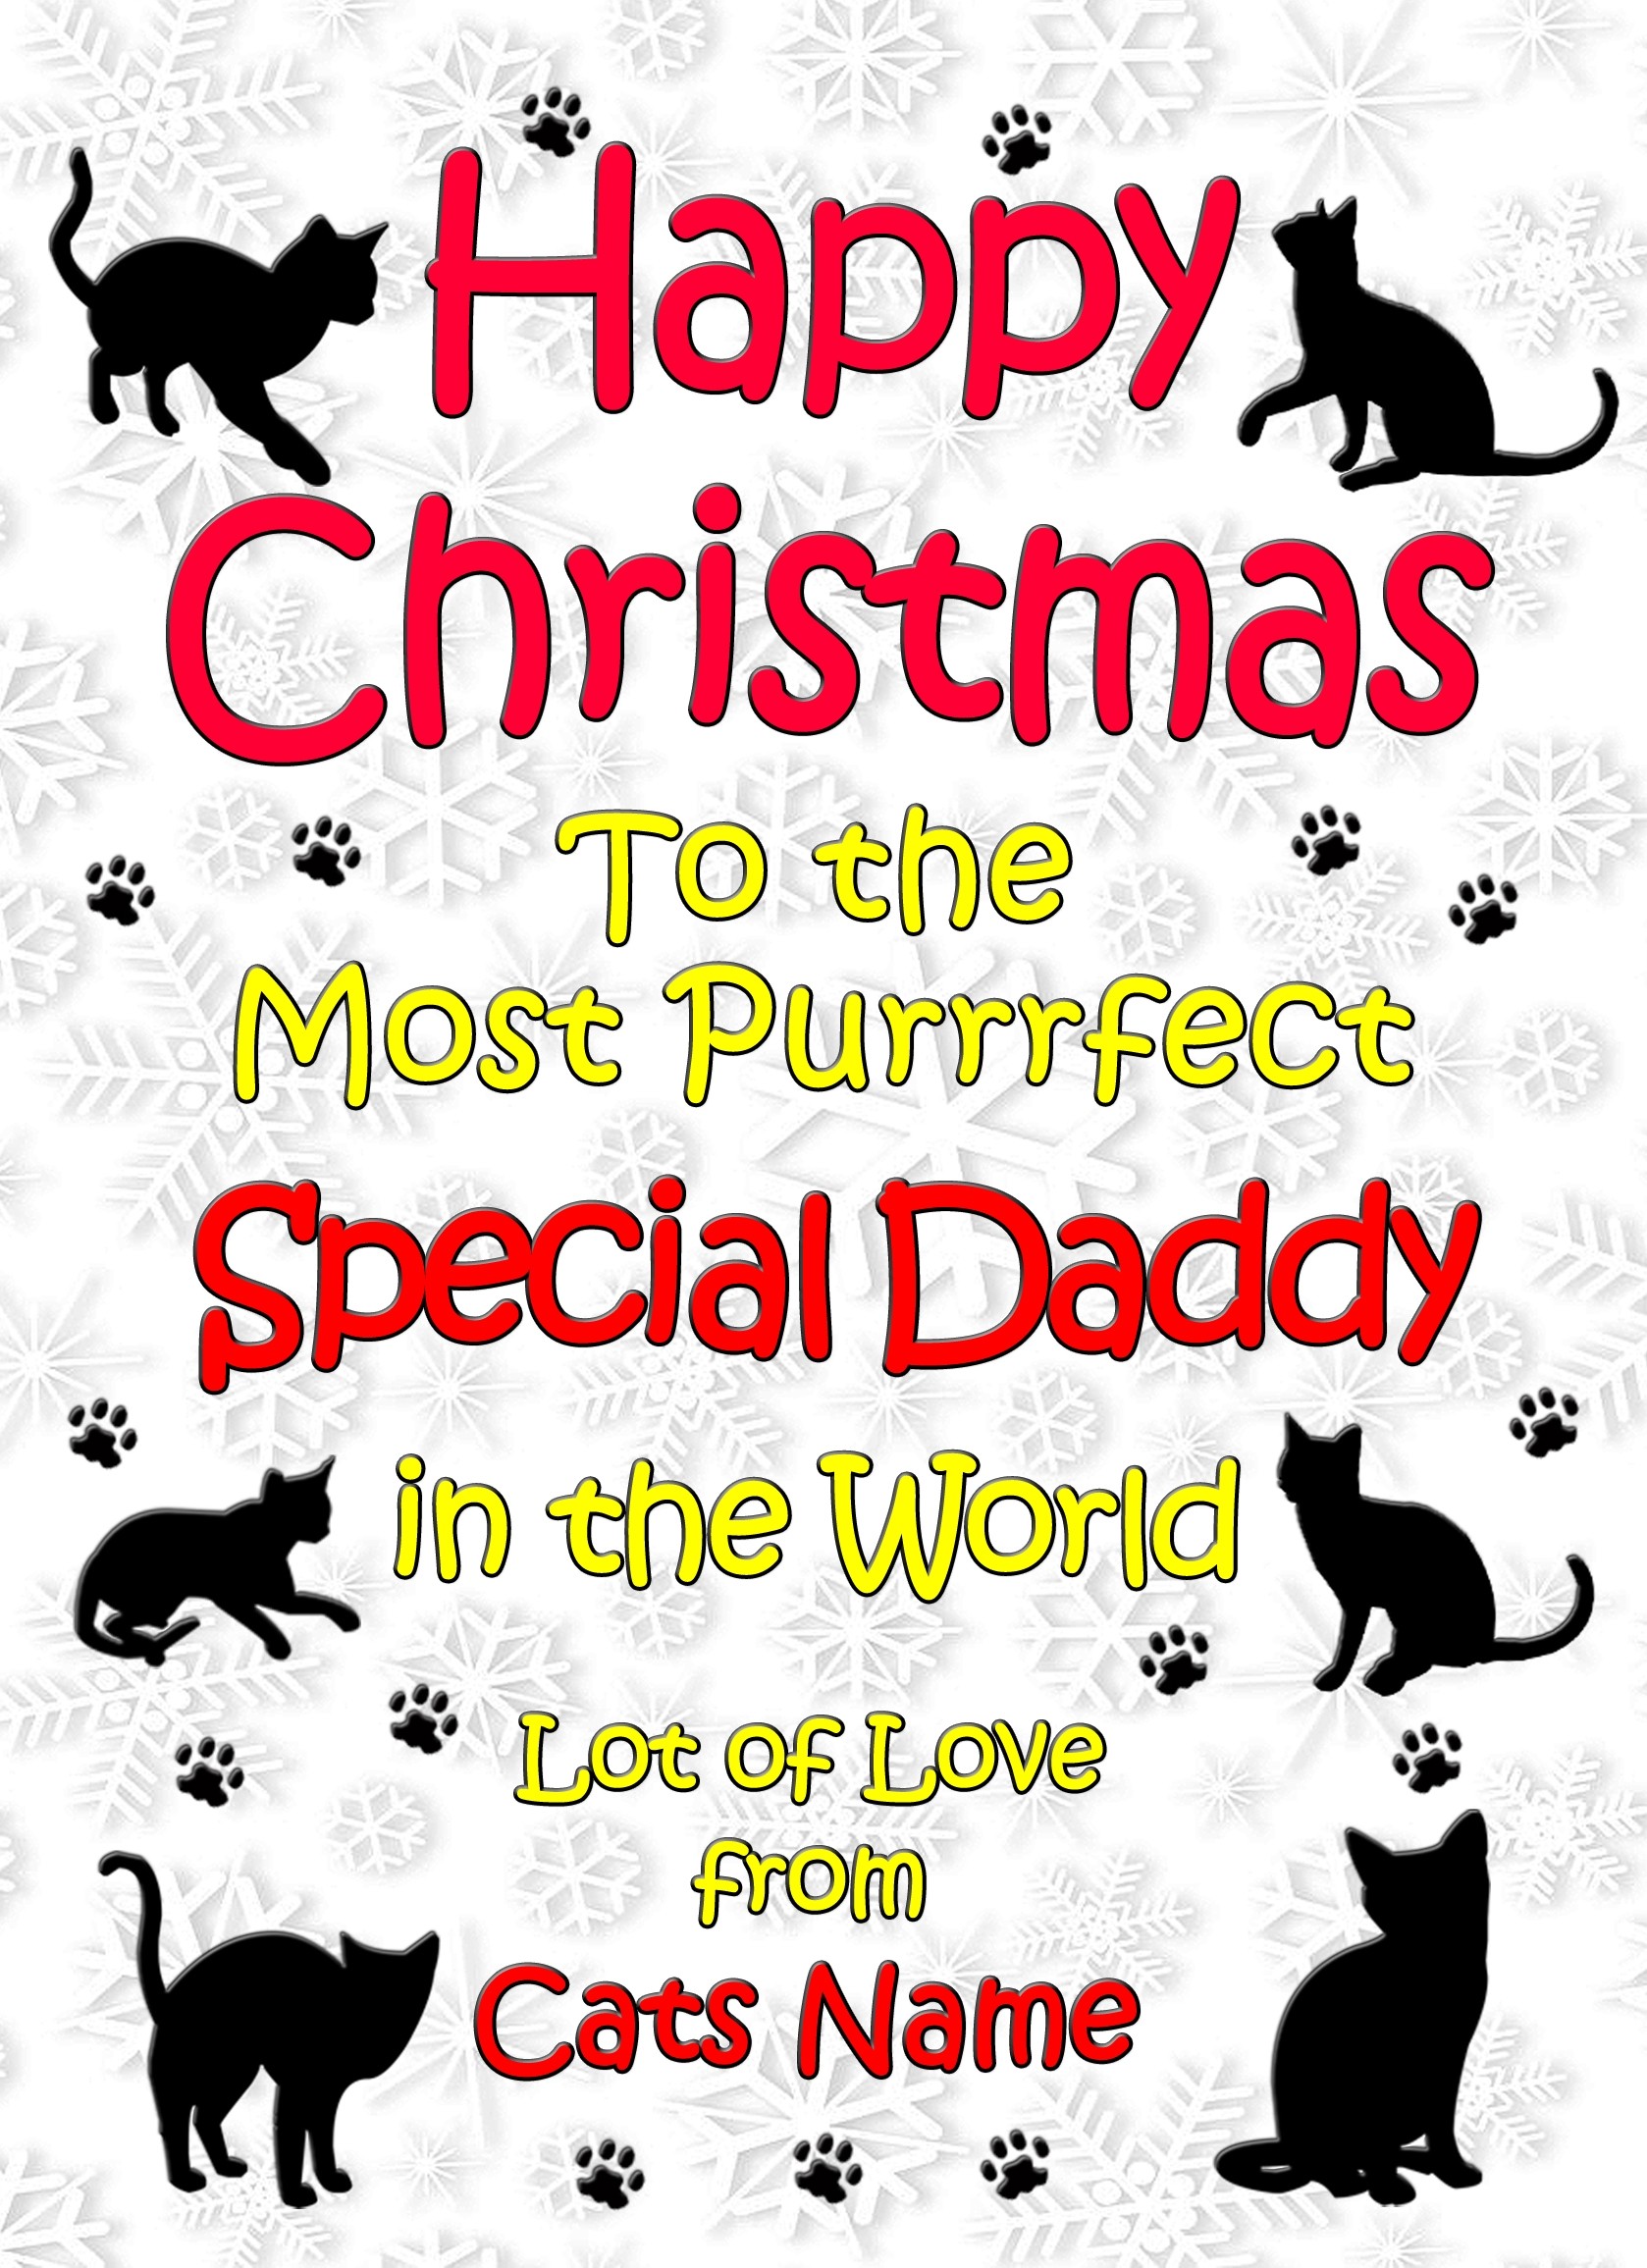 Personalised From The Cat Christmas Card (Special Daddy, White)